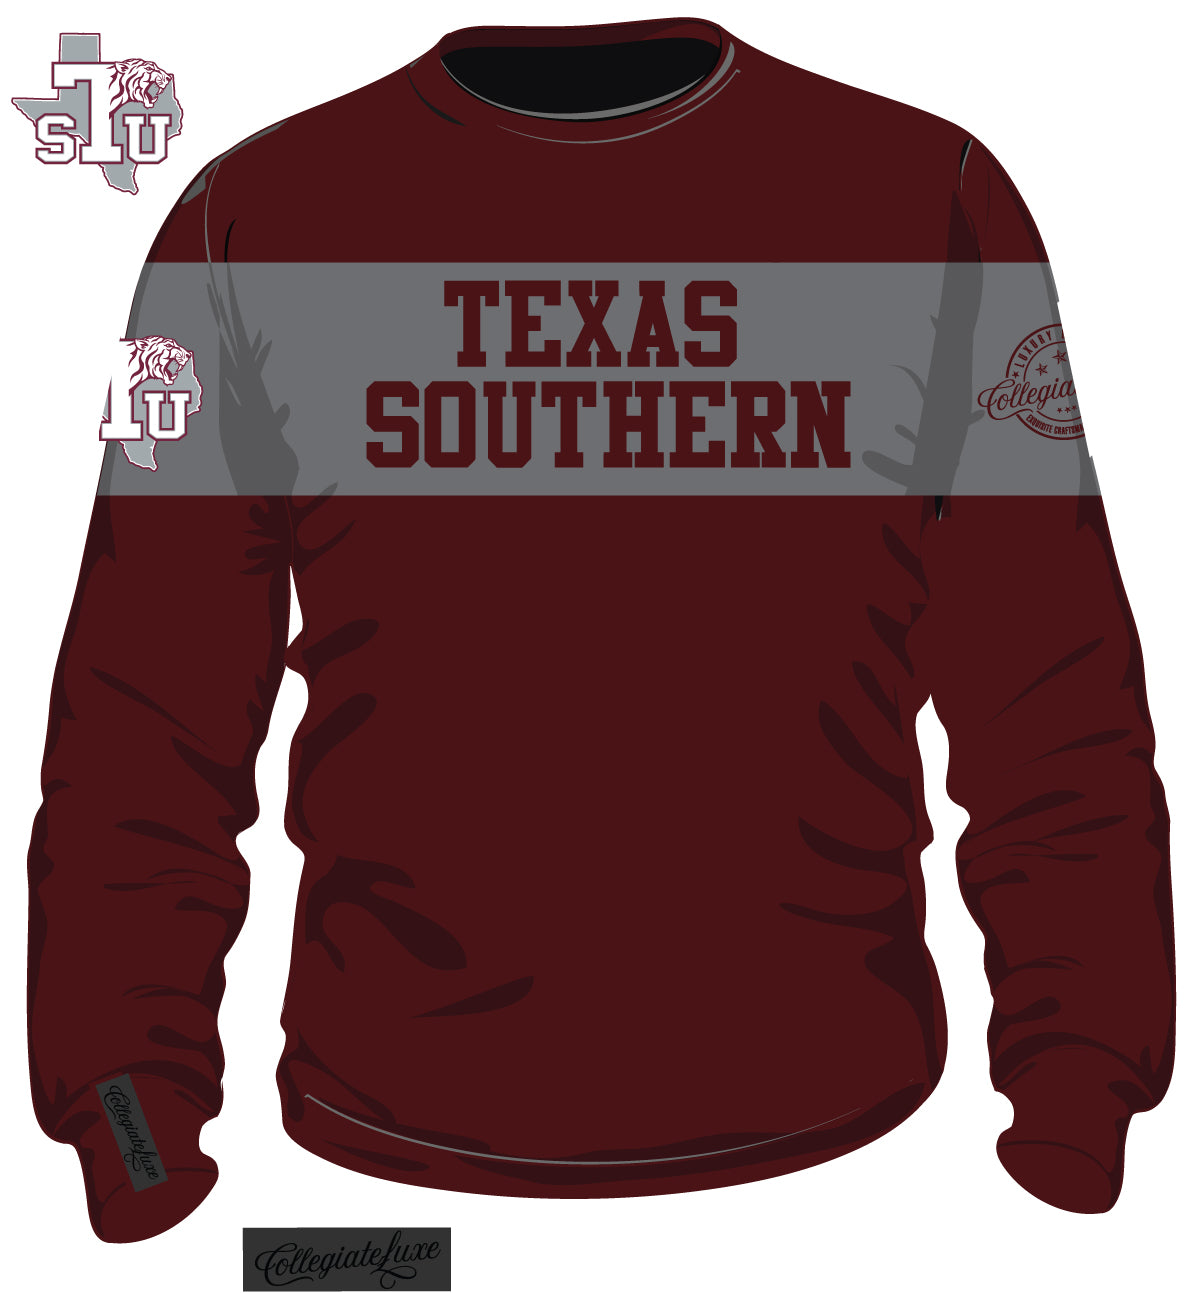 Texas Southern | 2 TONE (Chenille Embroidery) Unisex Sweatshirt